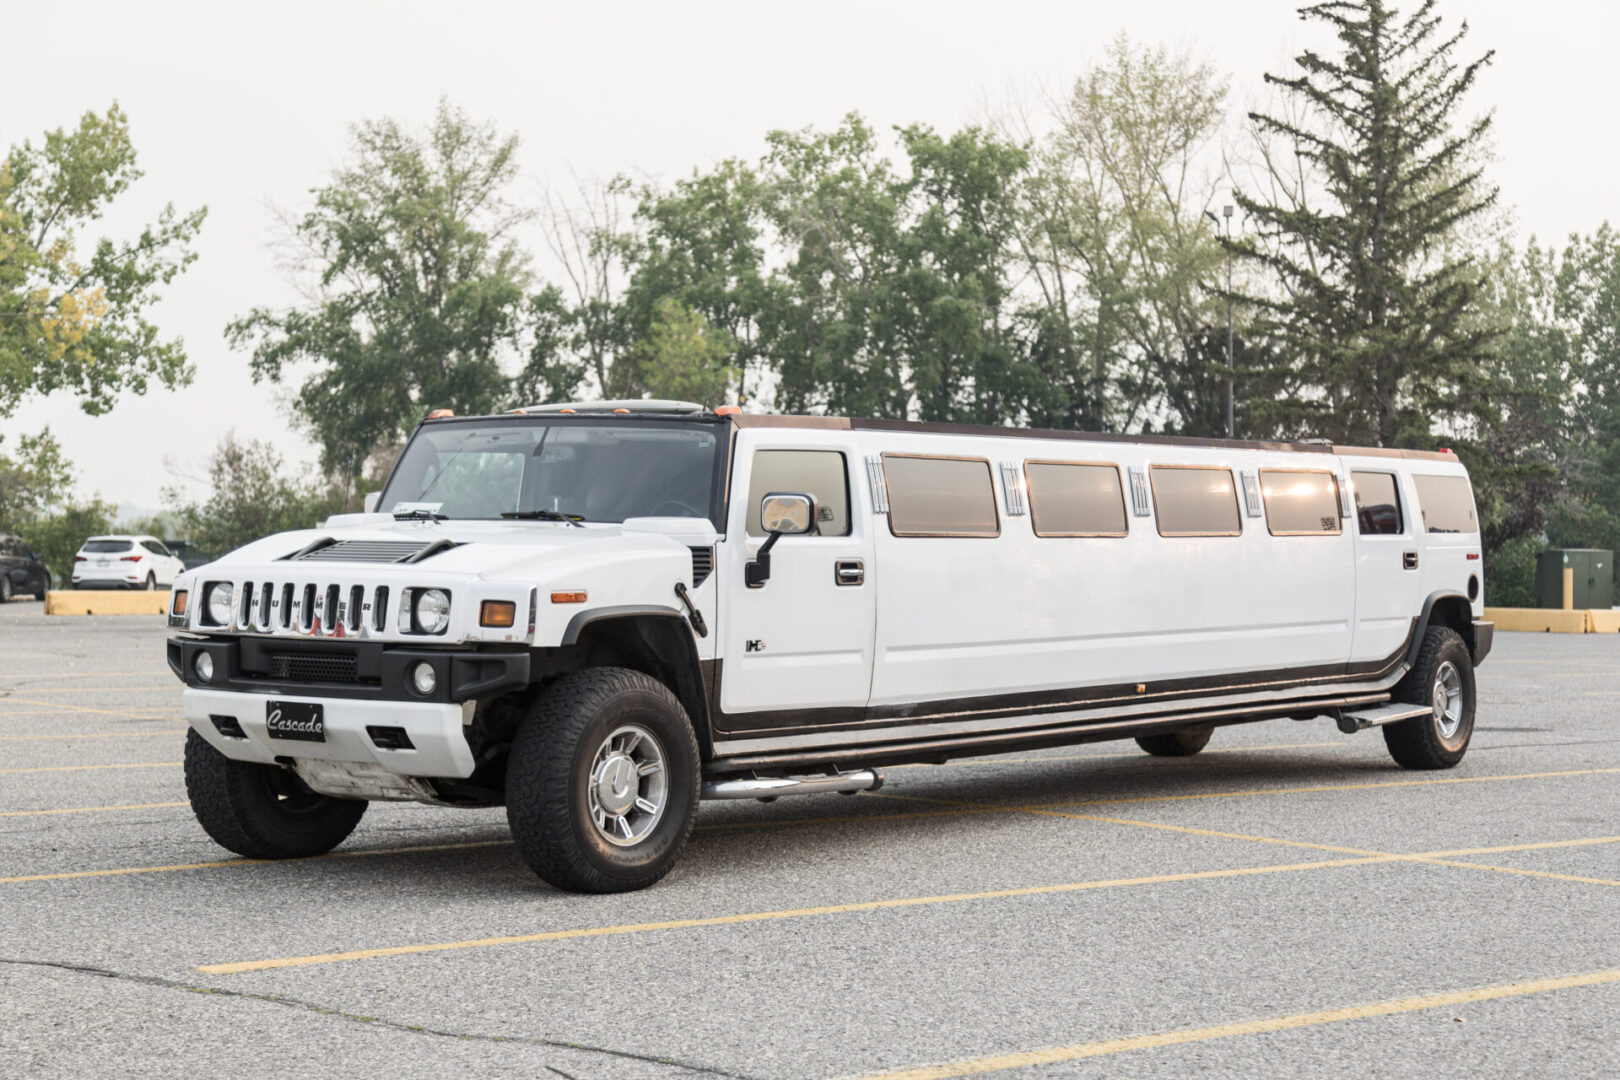 A white hummer limousine parked with trees in the back